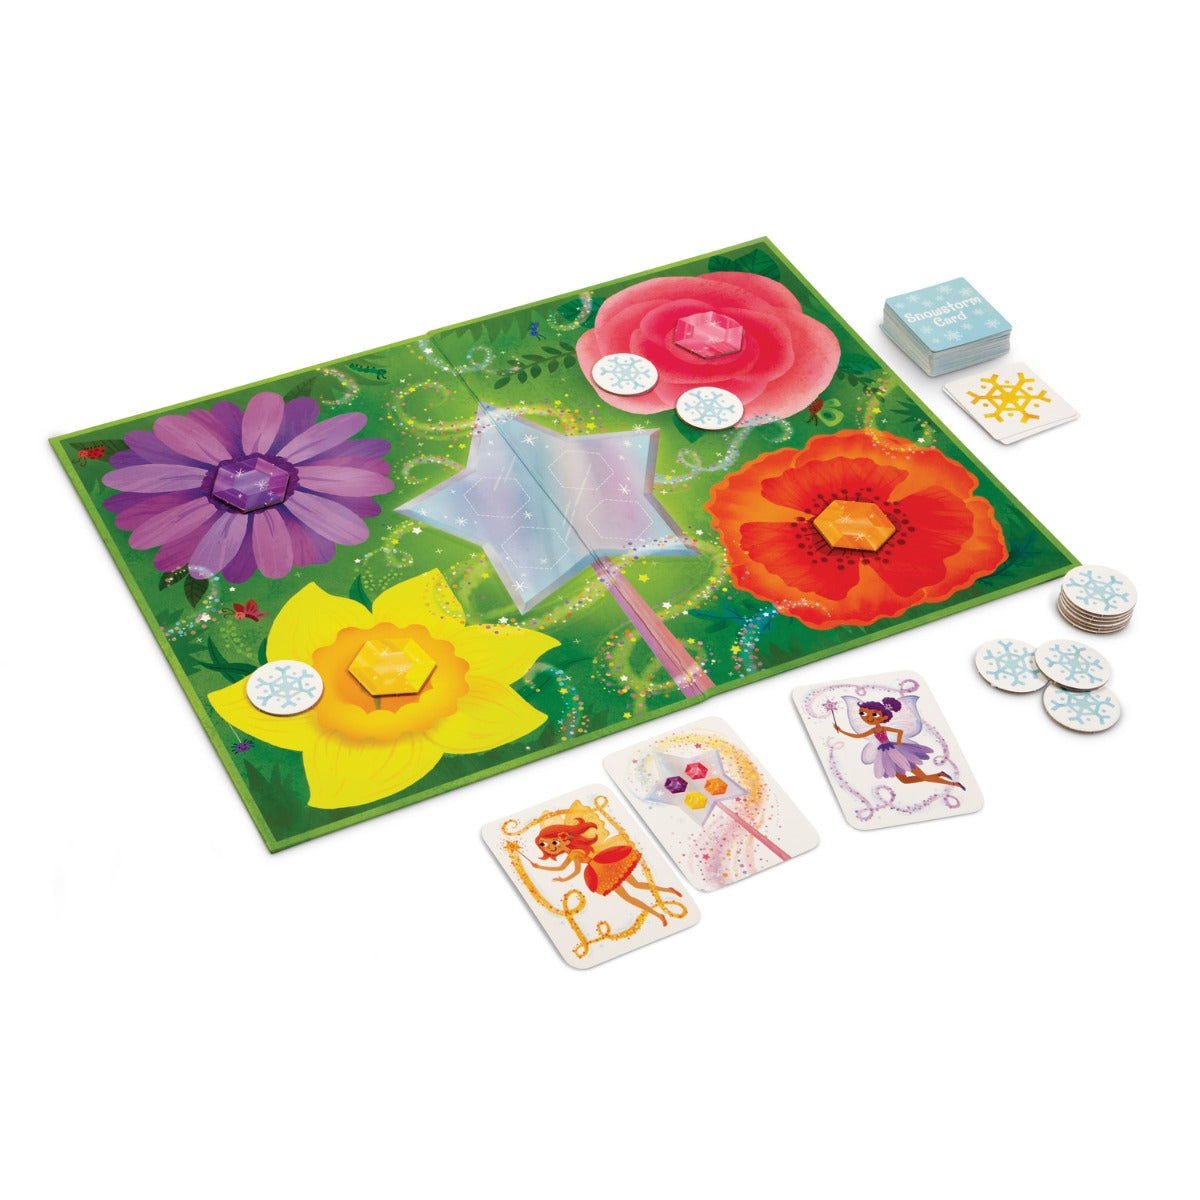 The Fairy Game - A Peaceable Kingdom Cooperative Game